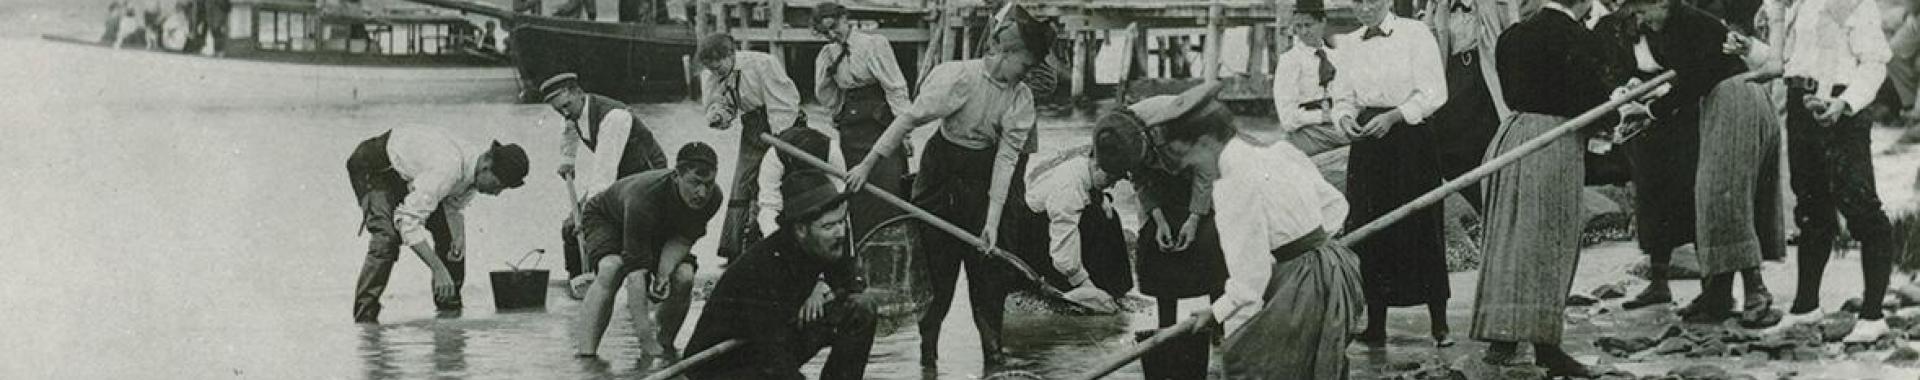 Faculty and students in the 1895 Botany course at the Marine Biological Laboratory in Woods Hole, MA. Participants collecting specimens.